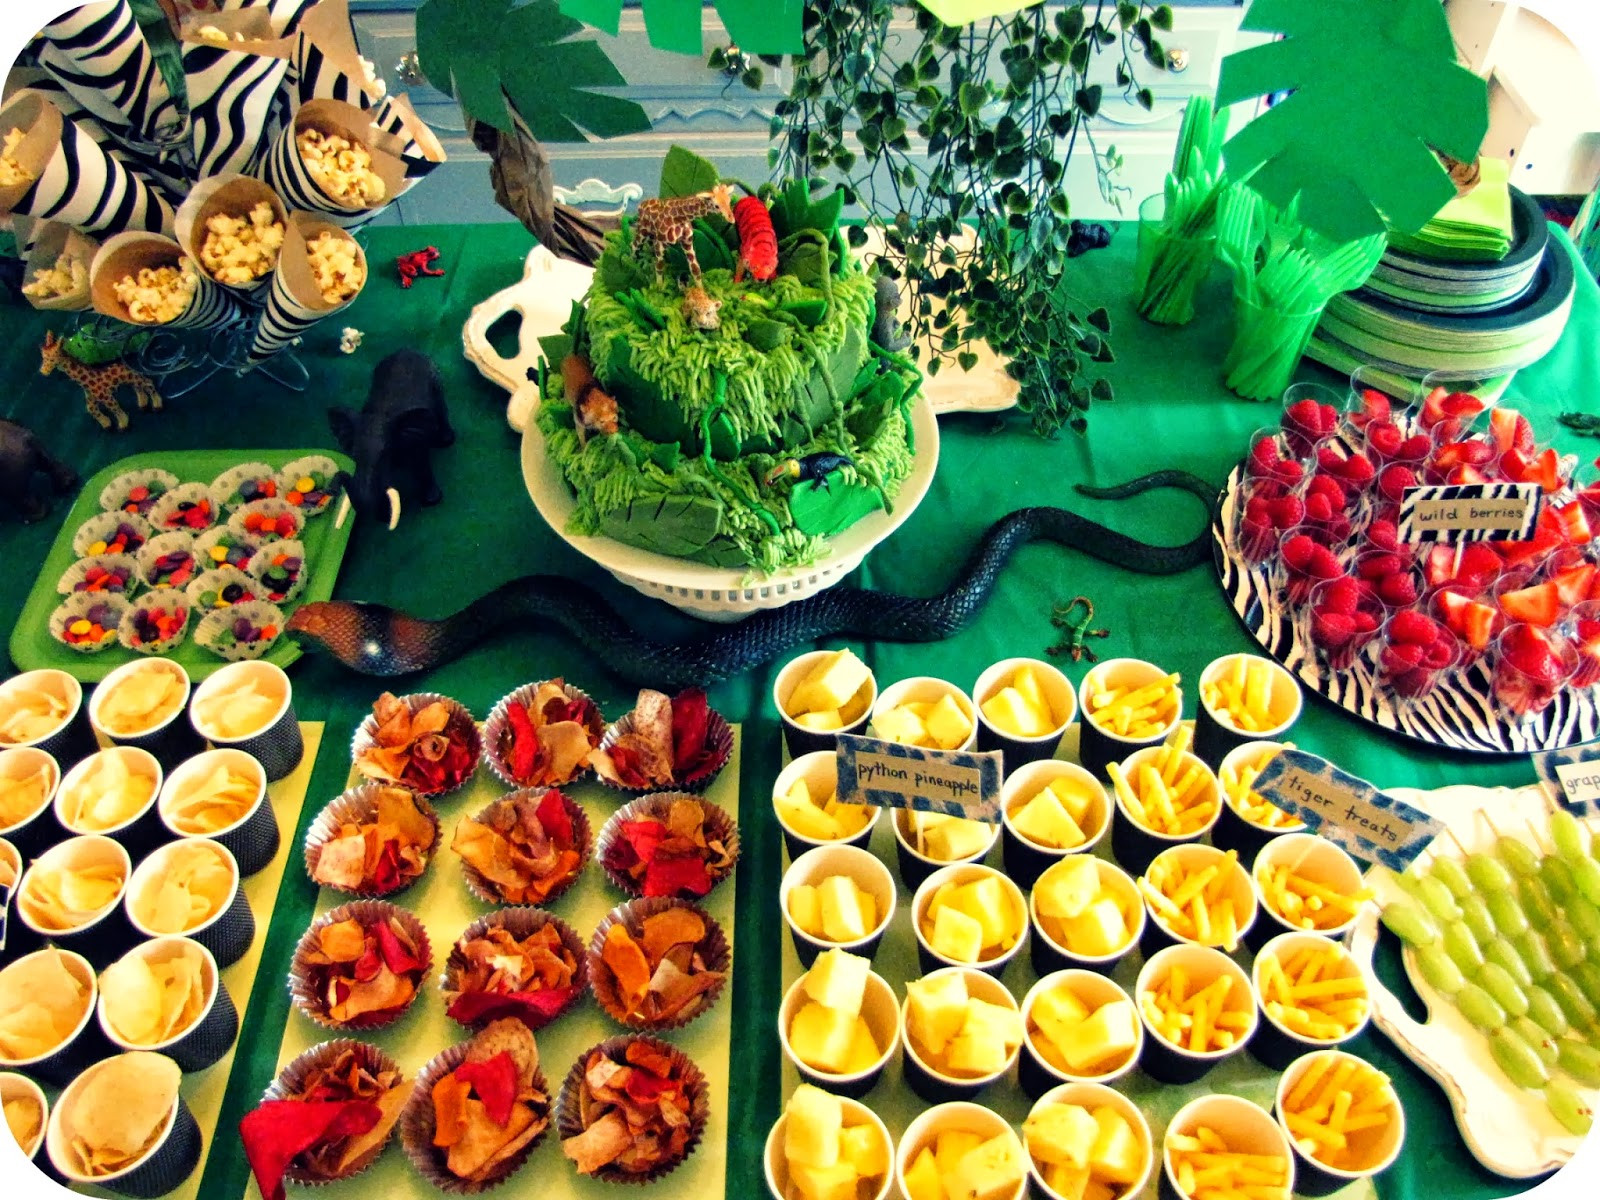 Jungle Party Food Ideas
 My House of Giggles A Party in the Jungle